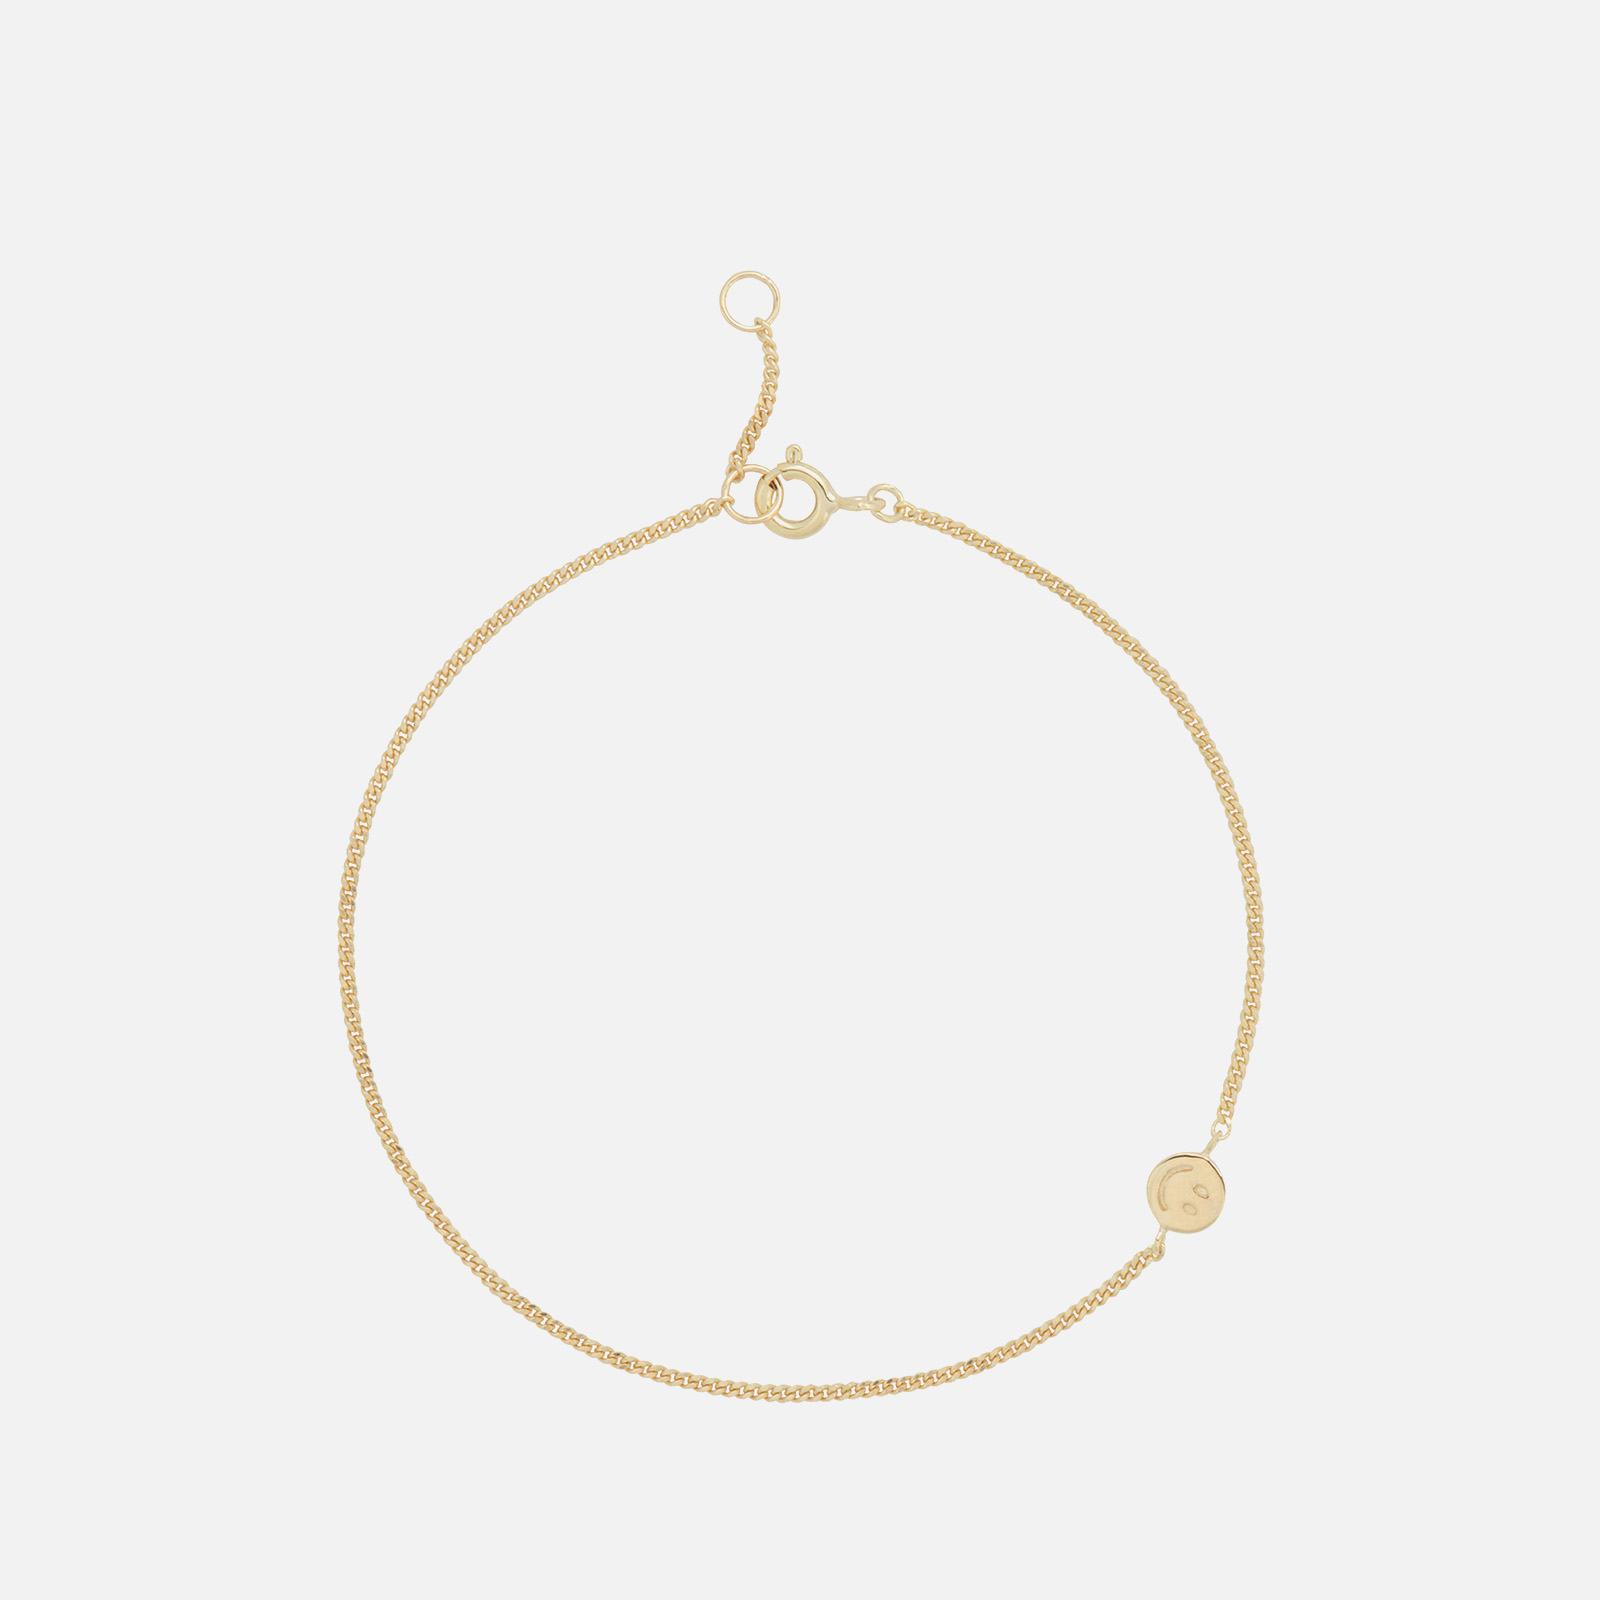 Anna + Nina Smiley Gold Plated Sterling Silver Bracelet | Coggles